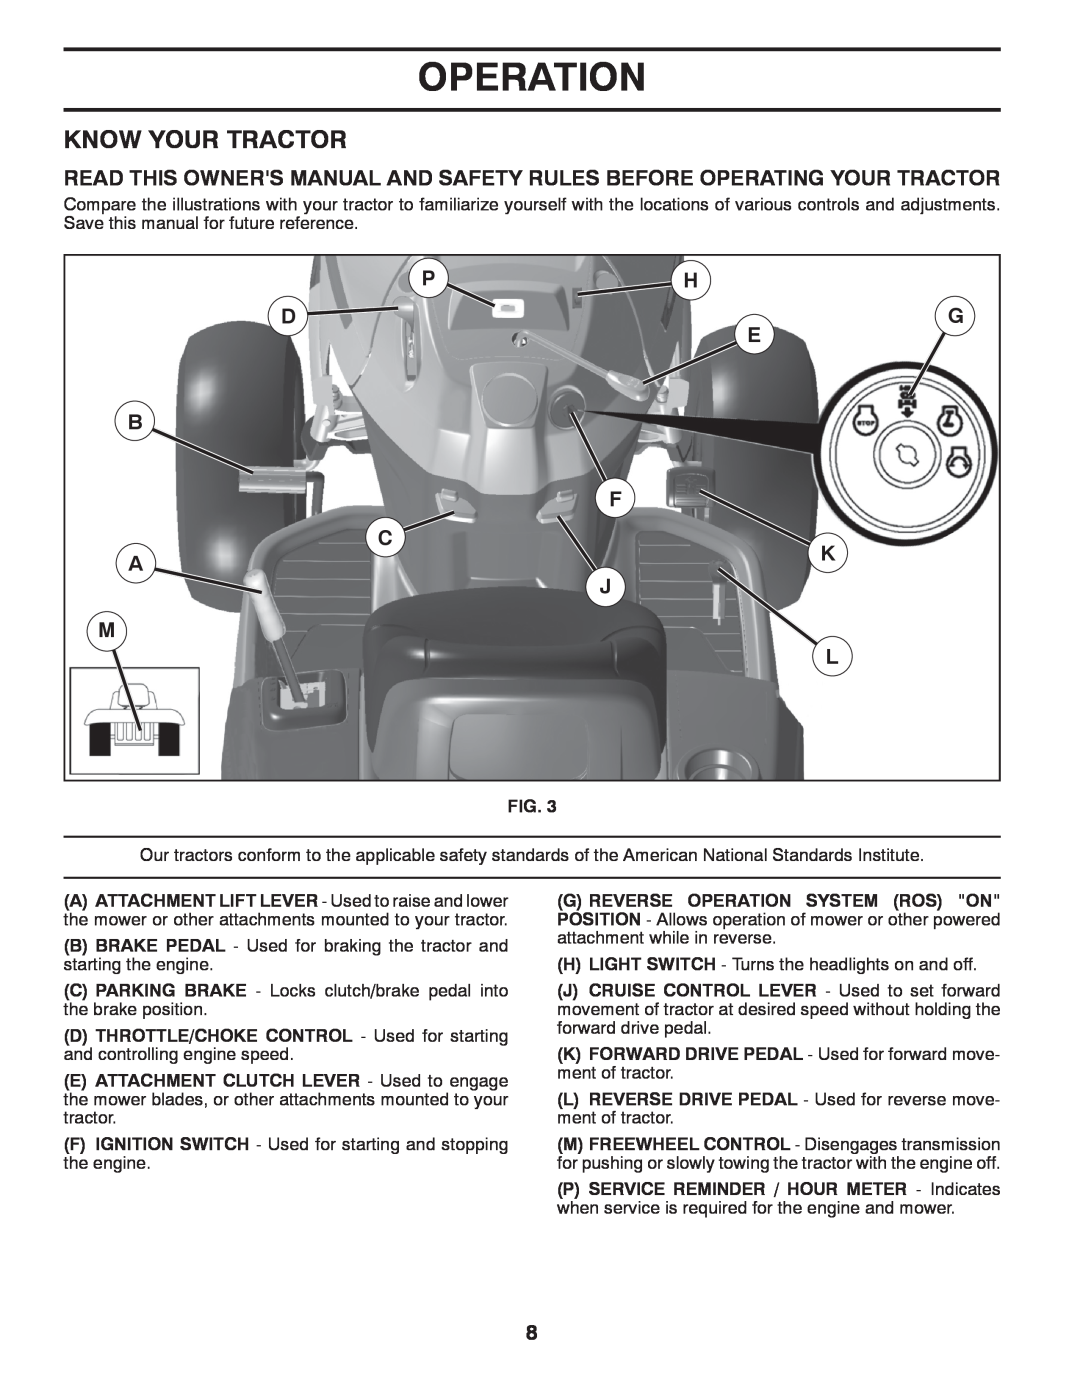 Husqvarna YTH21K46, 96045002100 owner manual Know Your Tractor, Ph Dg E, Operation 